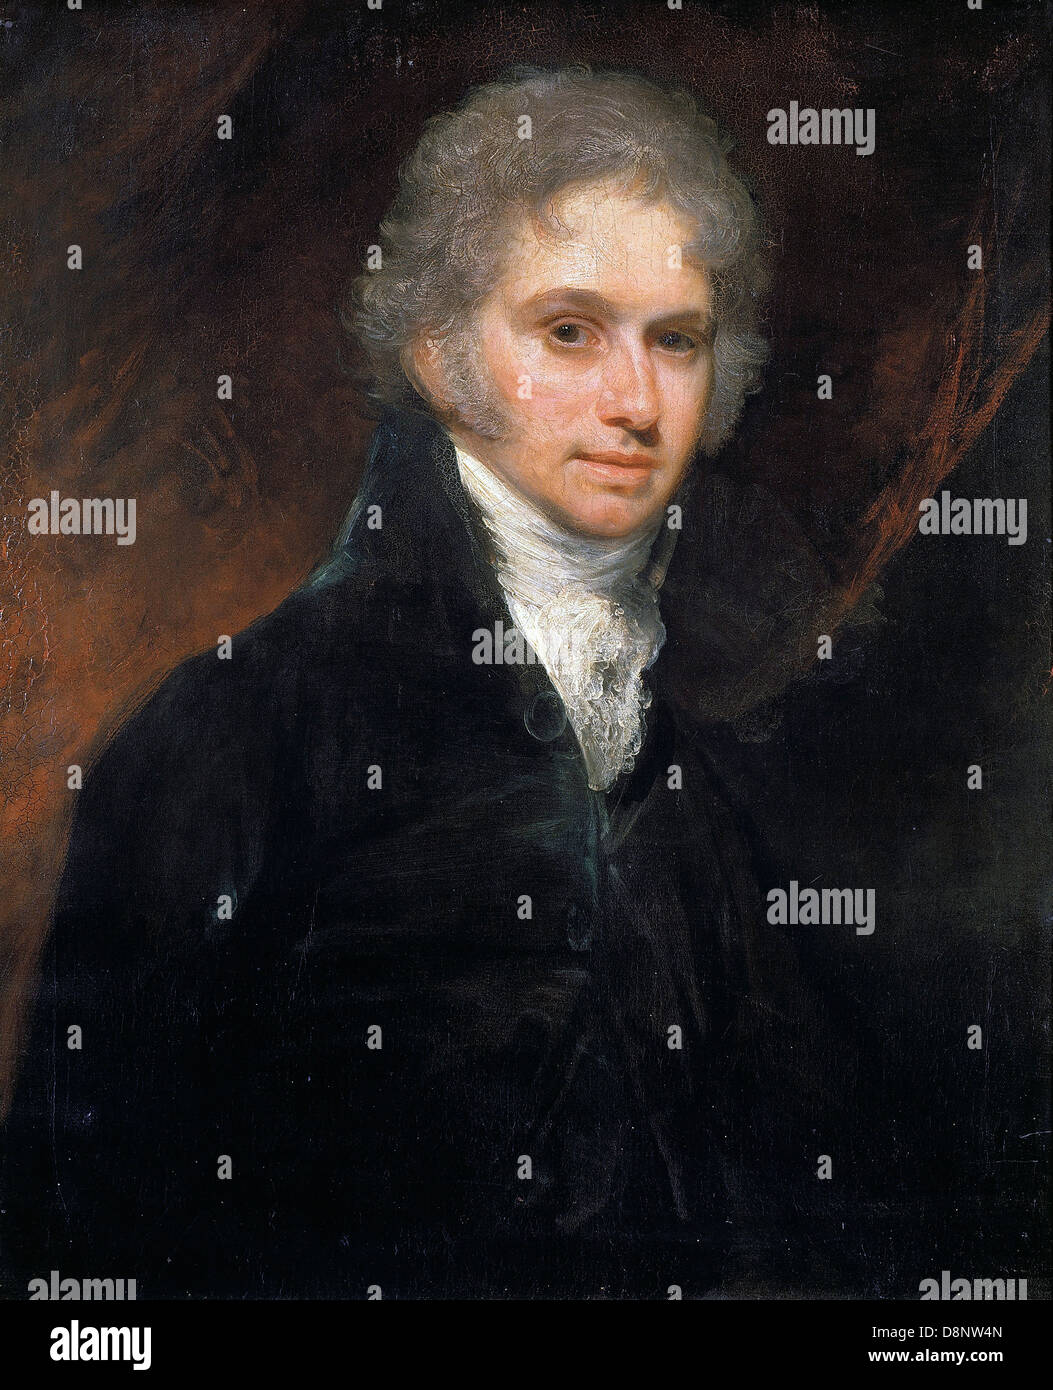 Sir William Beechey, Charles Small Pybus. Circa 1790s. Oil on canvas. Dulwich Picture Gallery, London. Stock Photo